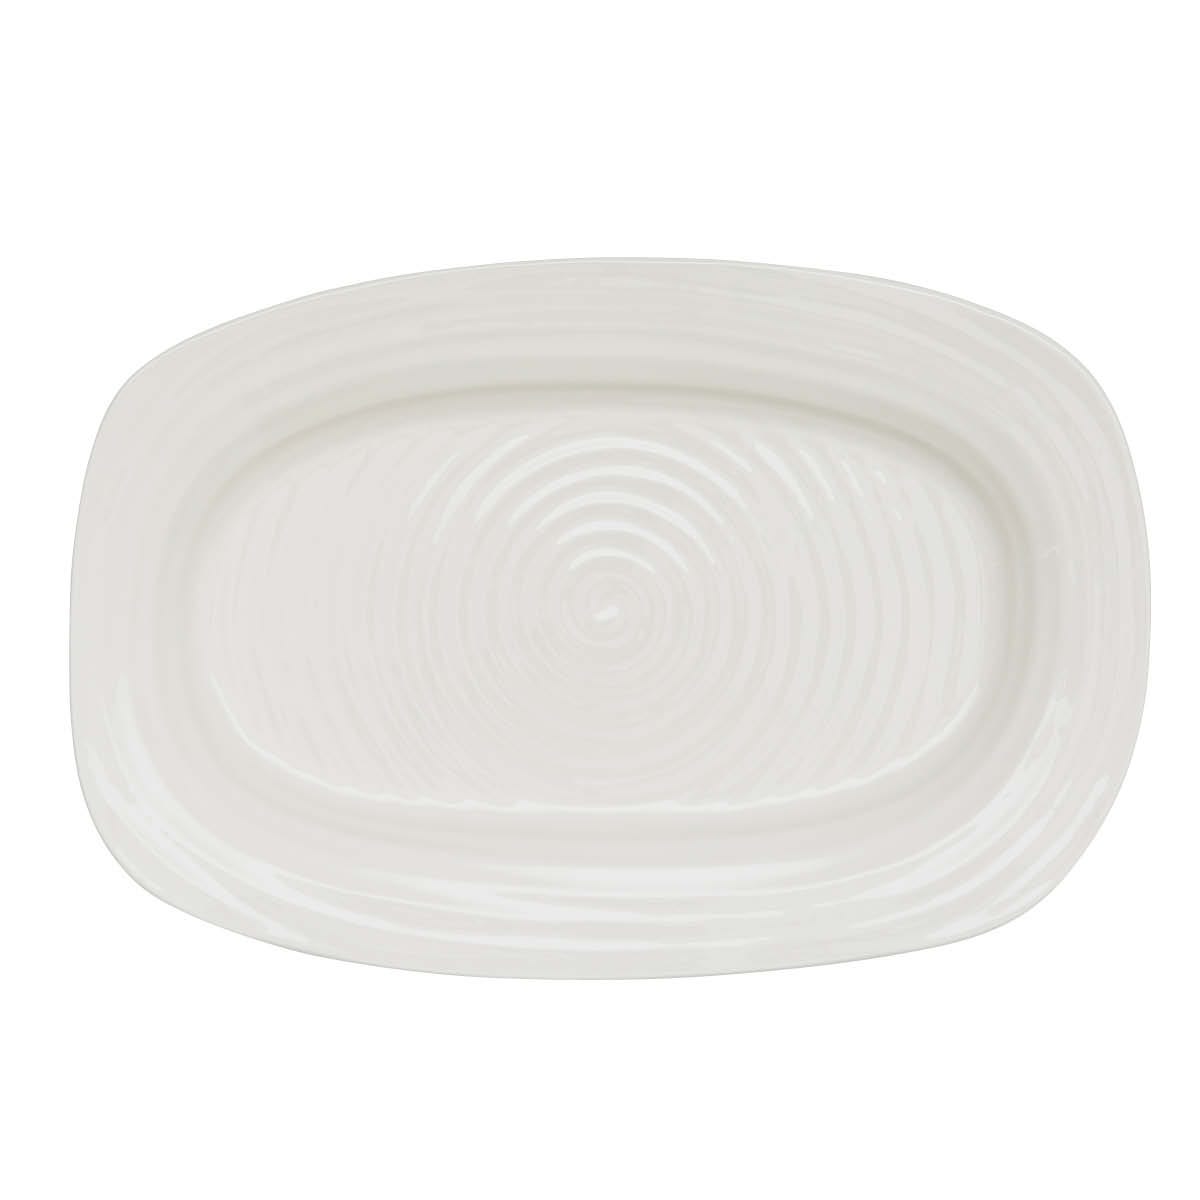 Sophie Conran for Portmeirion White Sandwich Tray